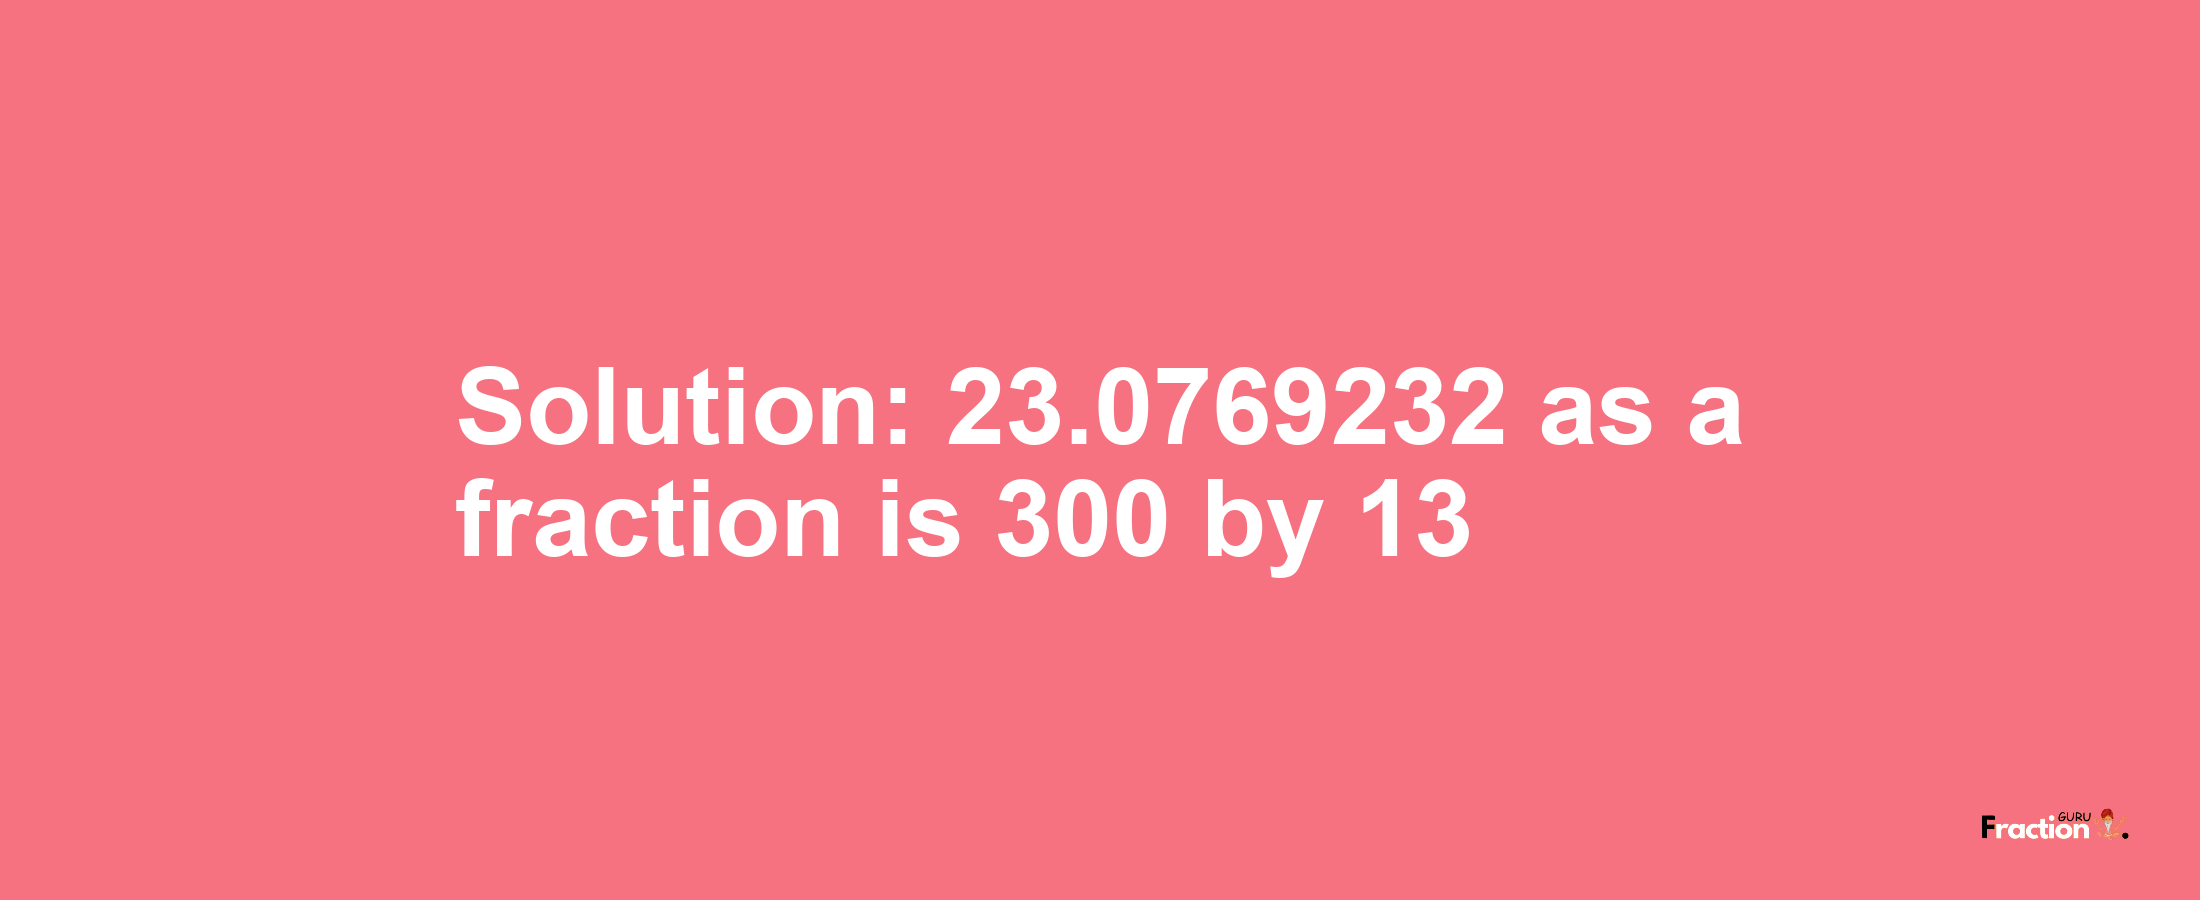 Solution:23.0769232 as a fraction is 300/13